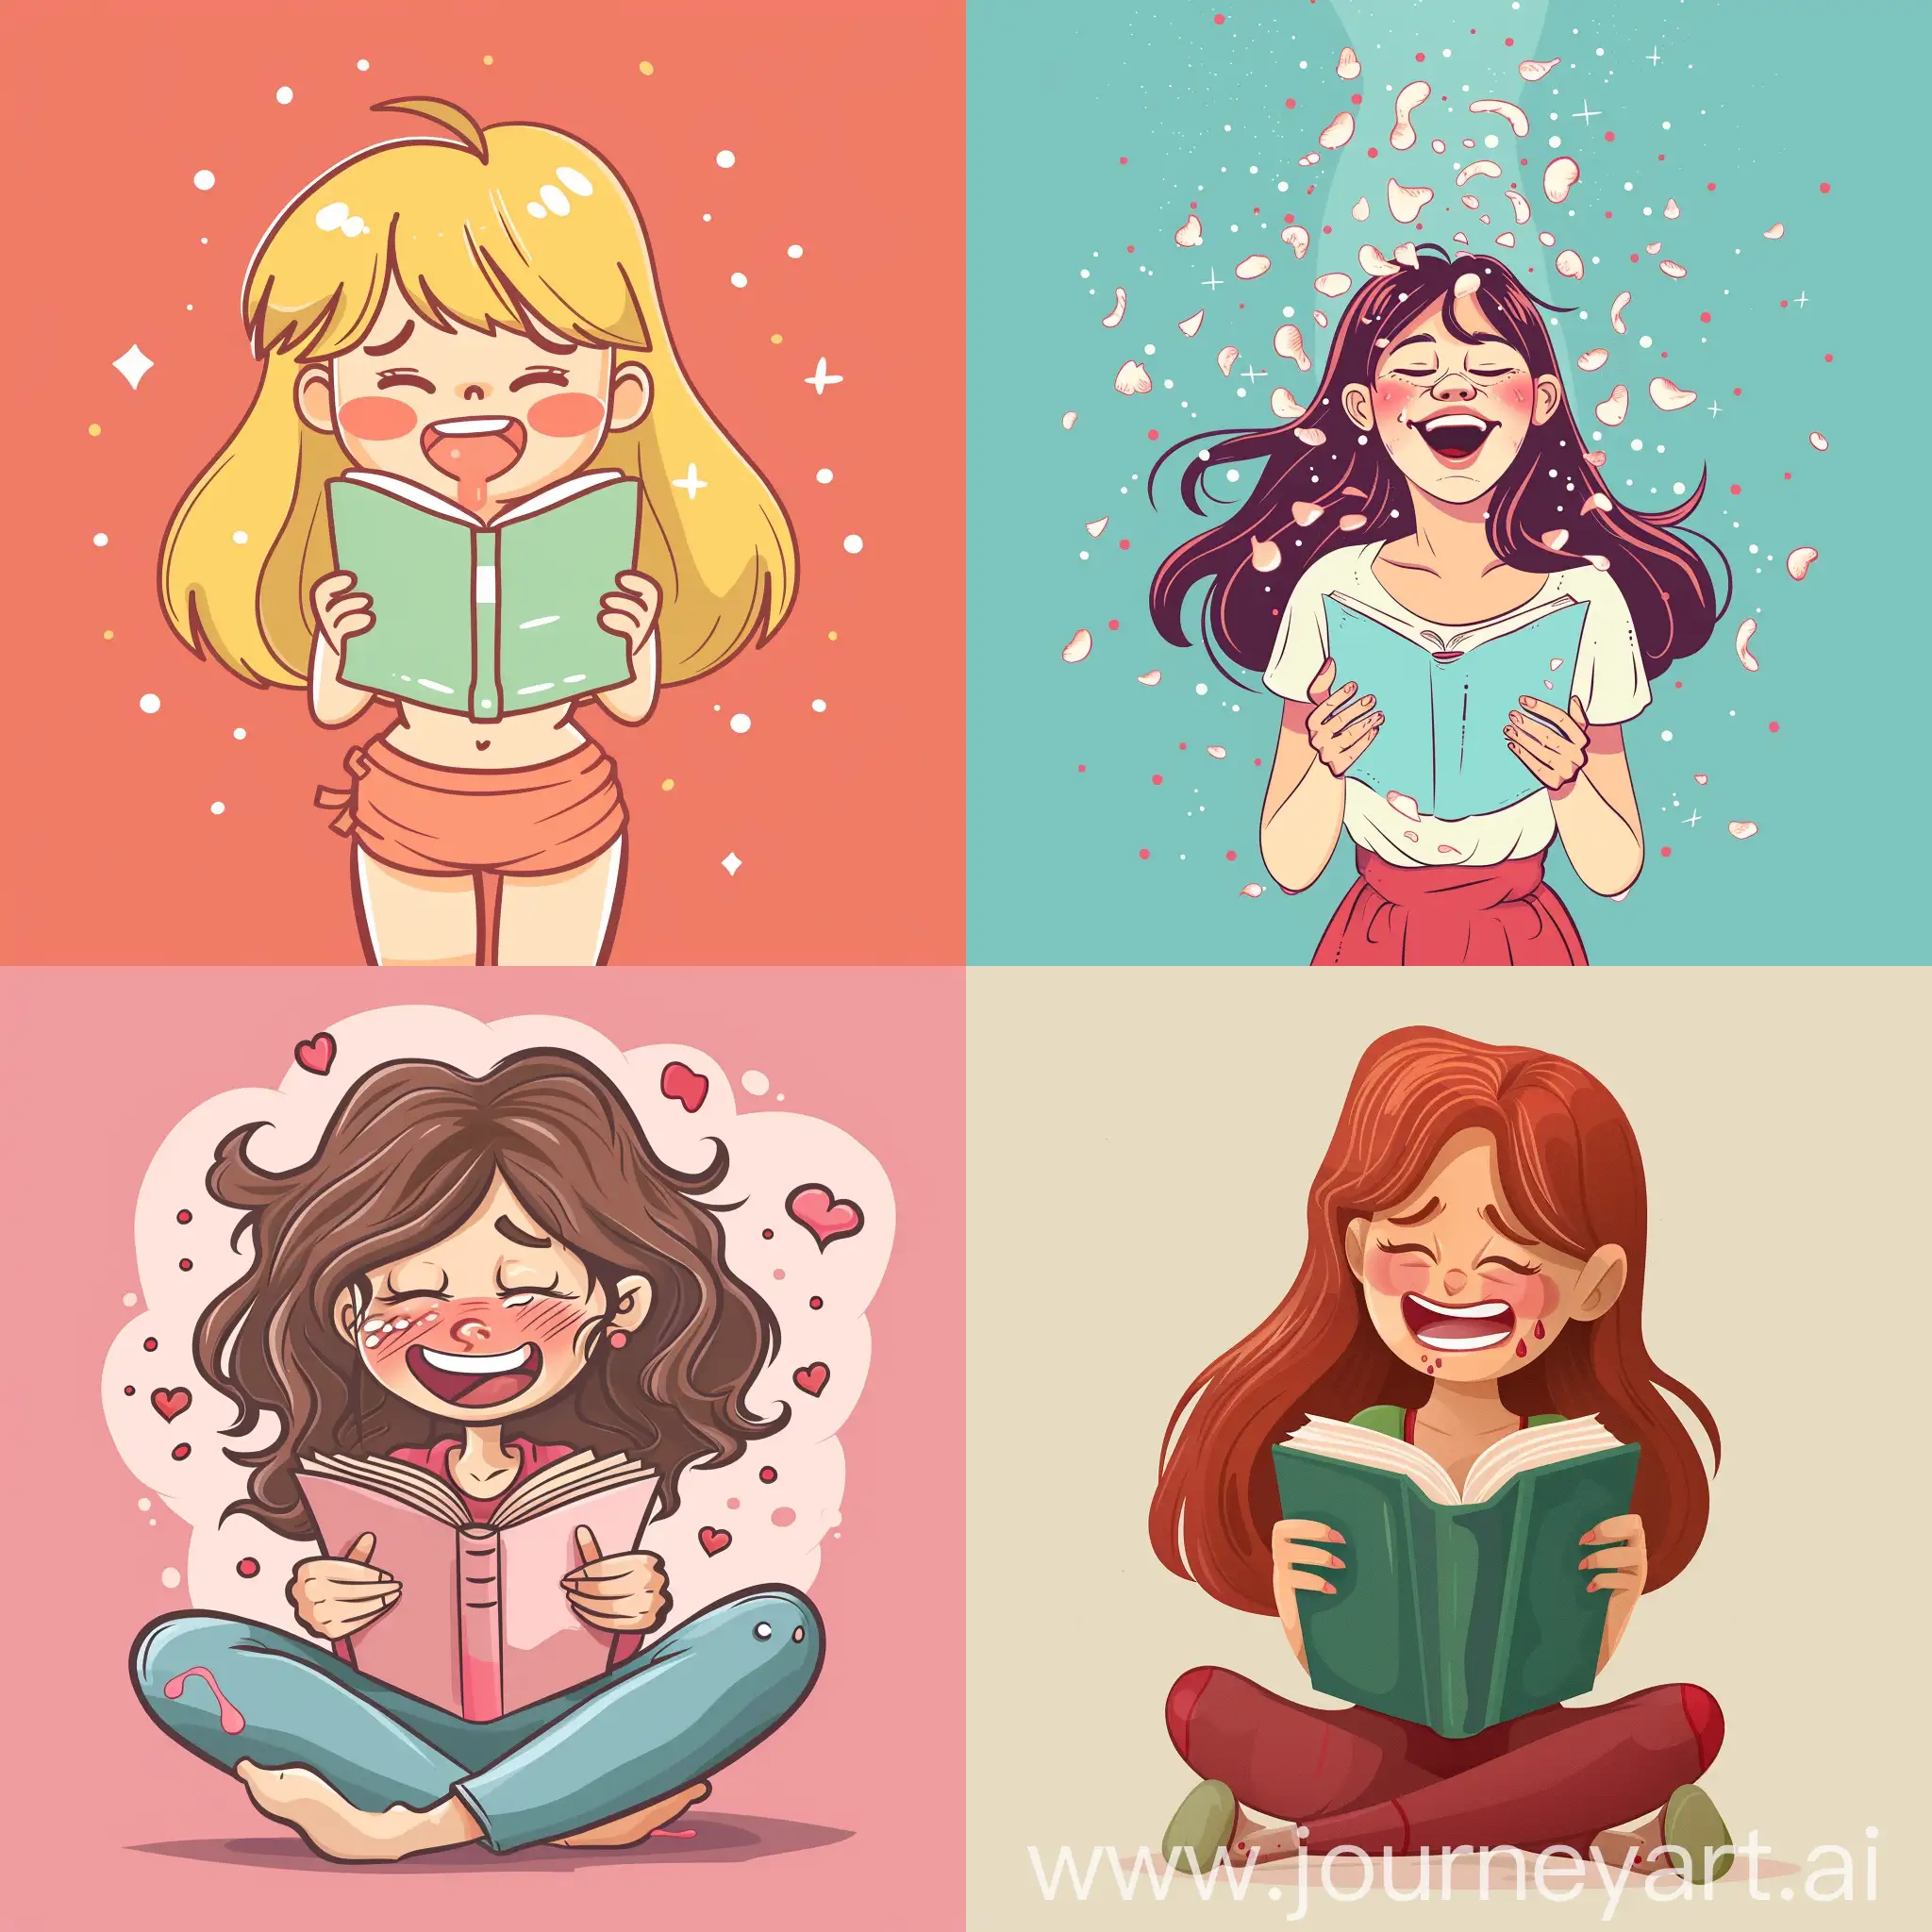 Lighthearted-Menstrual-Humor-Cartoon-Characters-Embrace-Laughter-in-the-Luteal-Phase